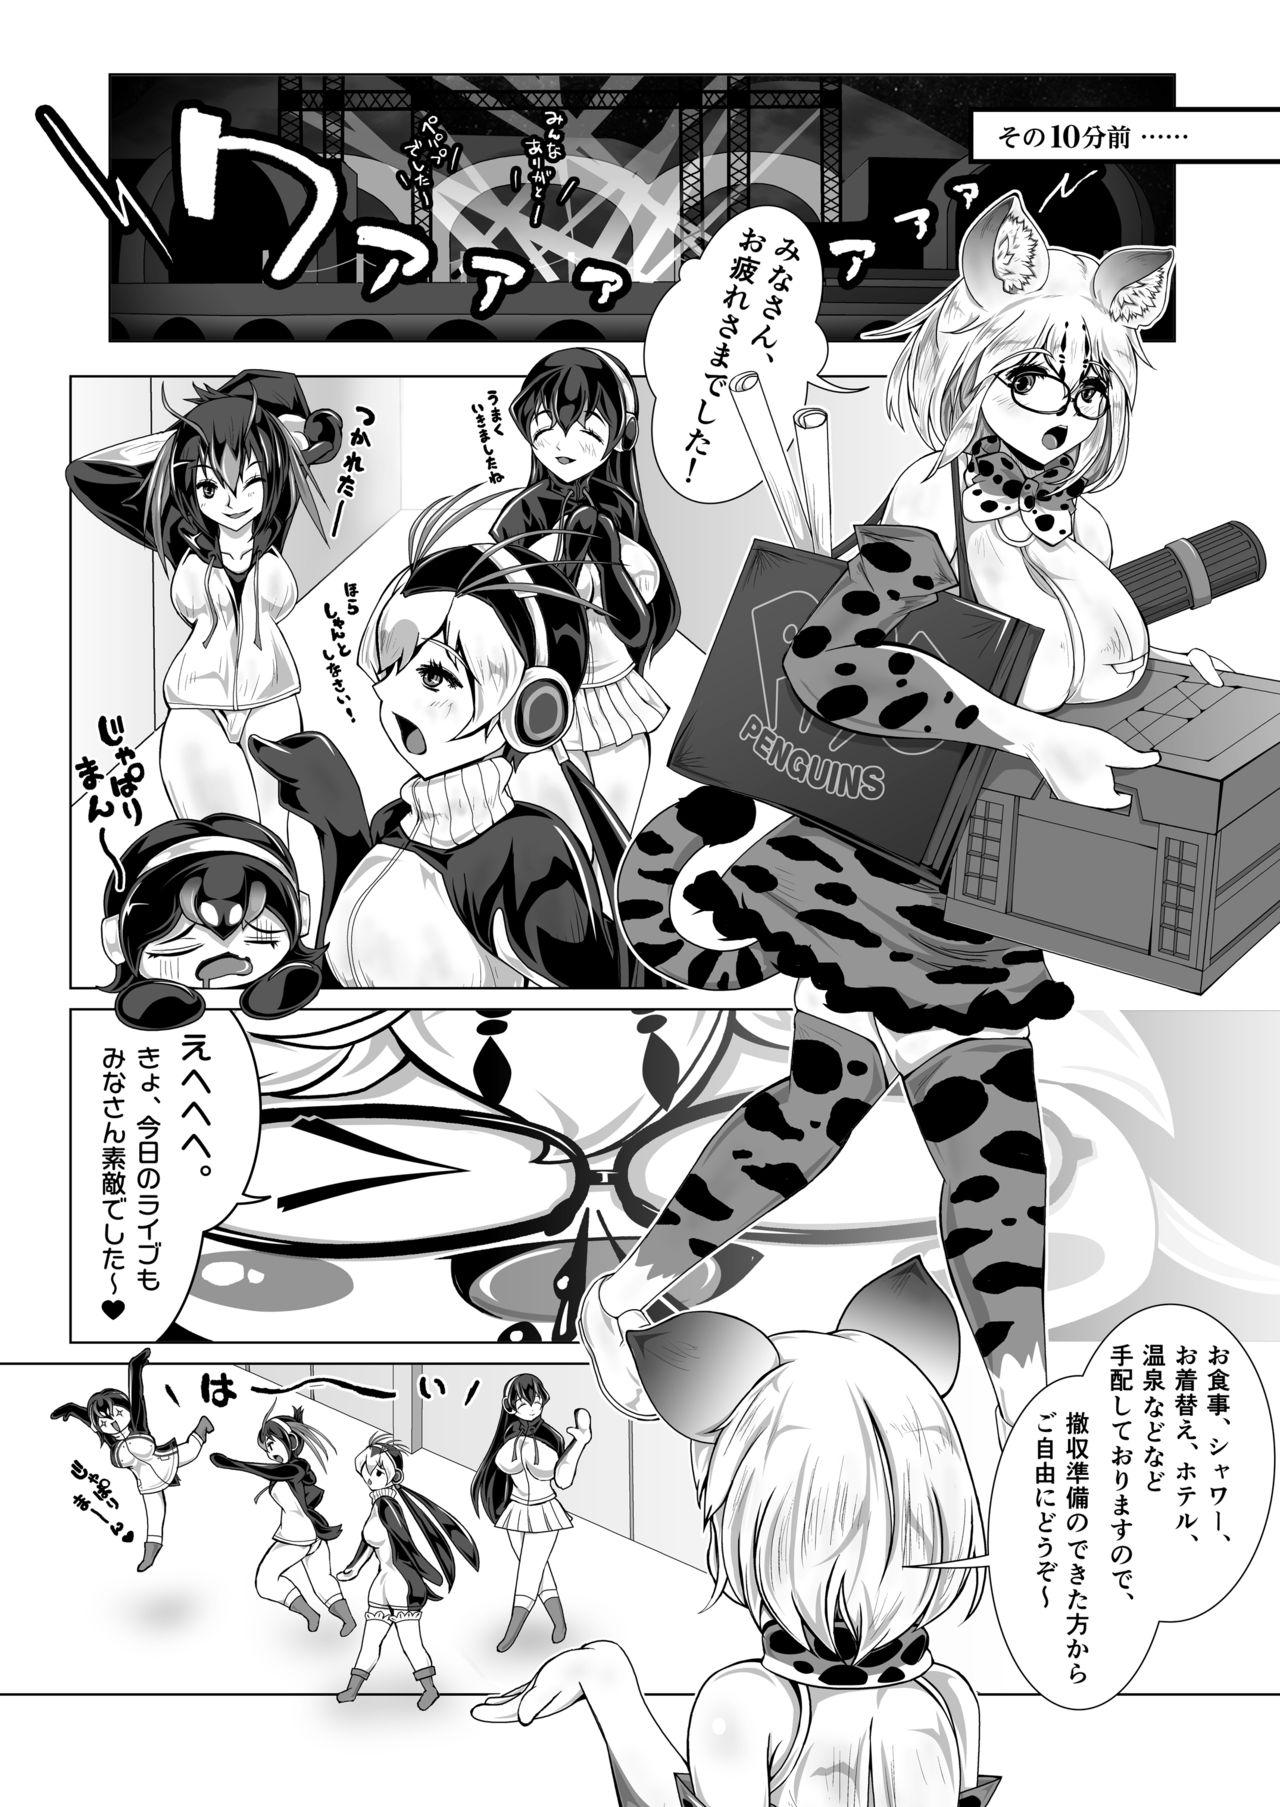 Blondes Margay no PPP Management - Kemono friends Rough - Page 4